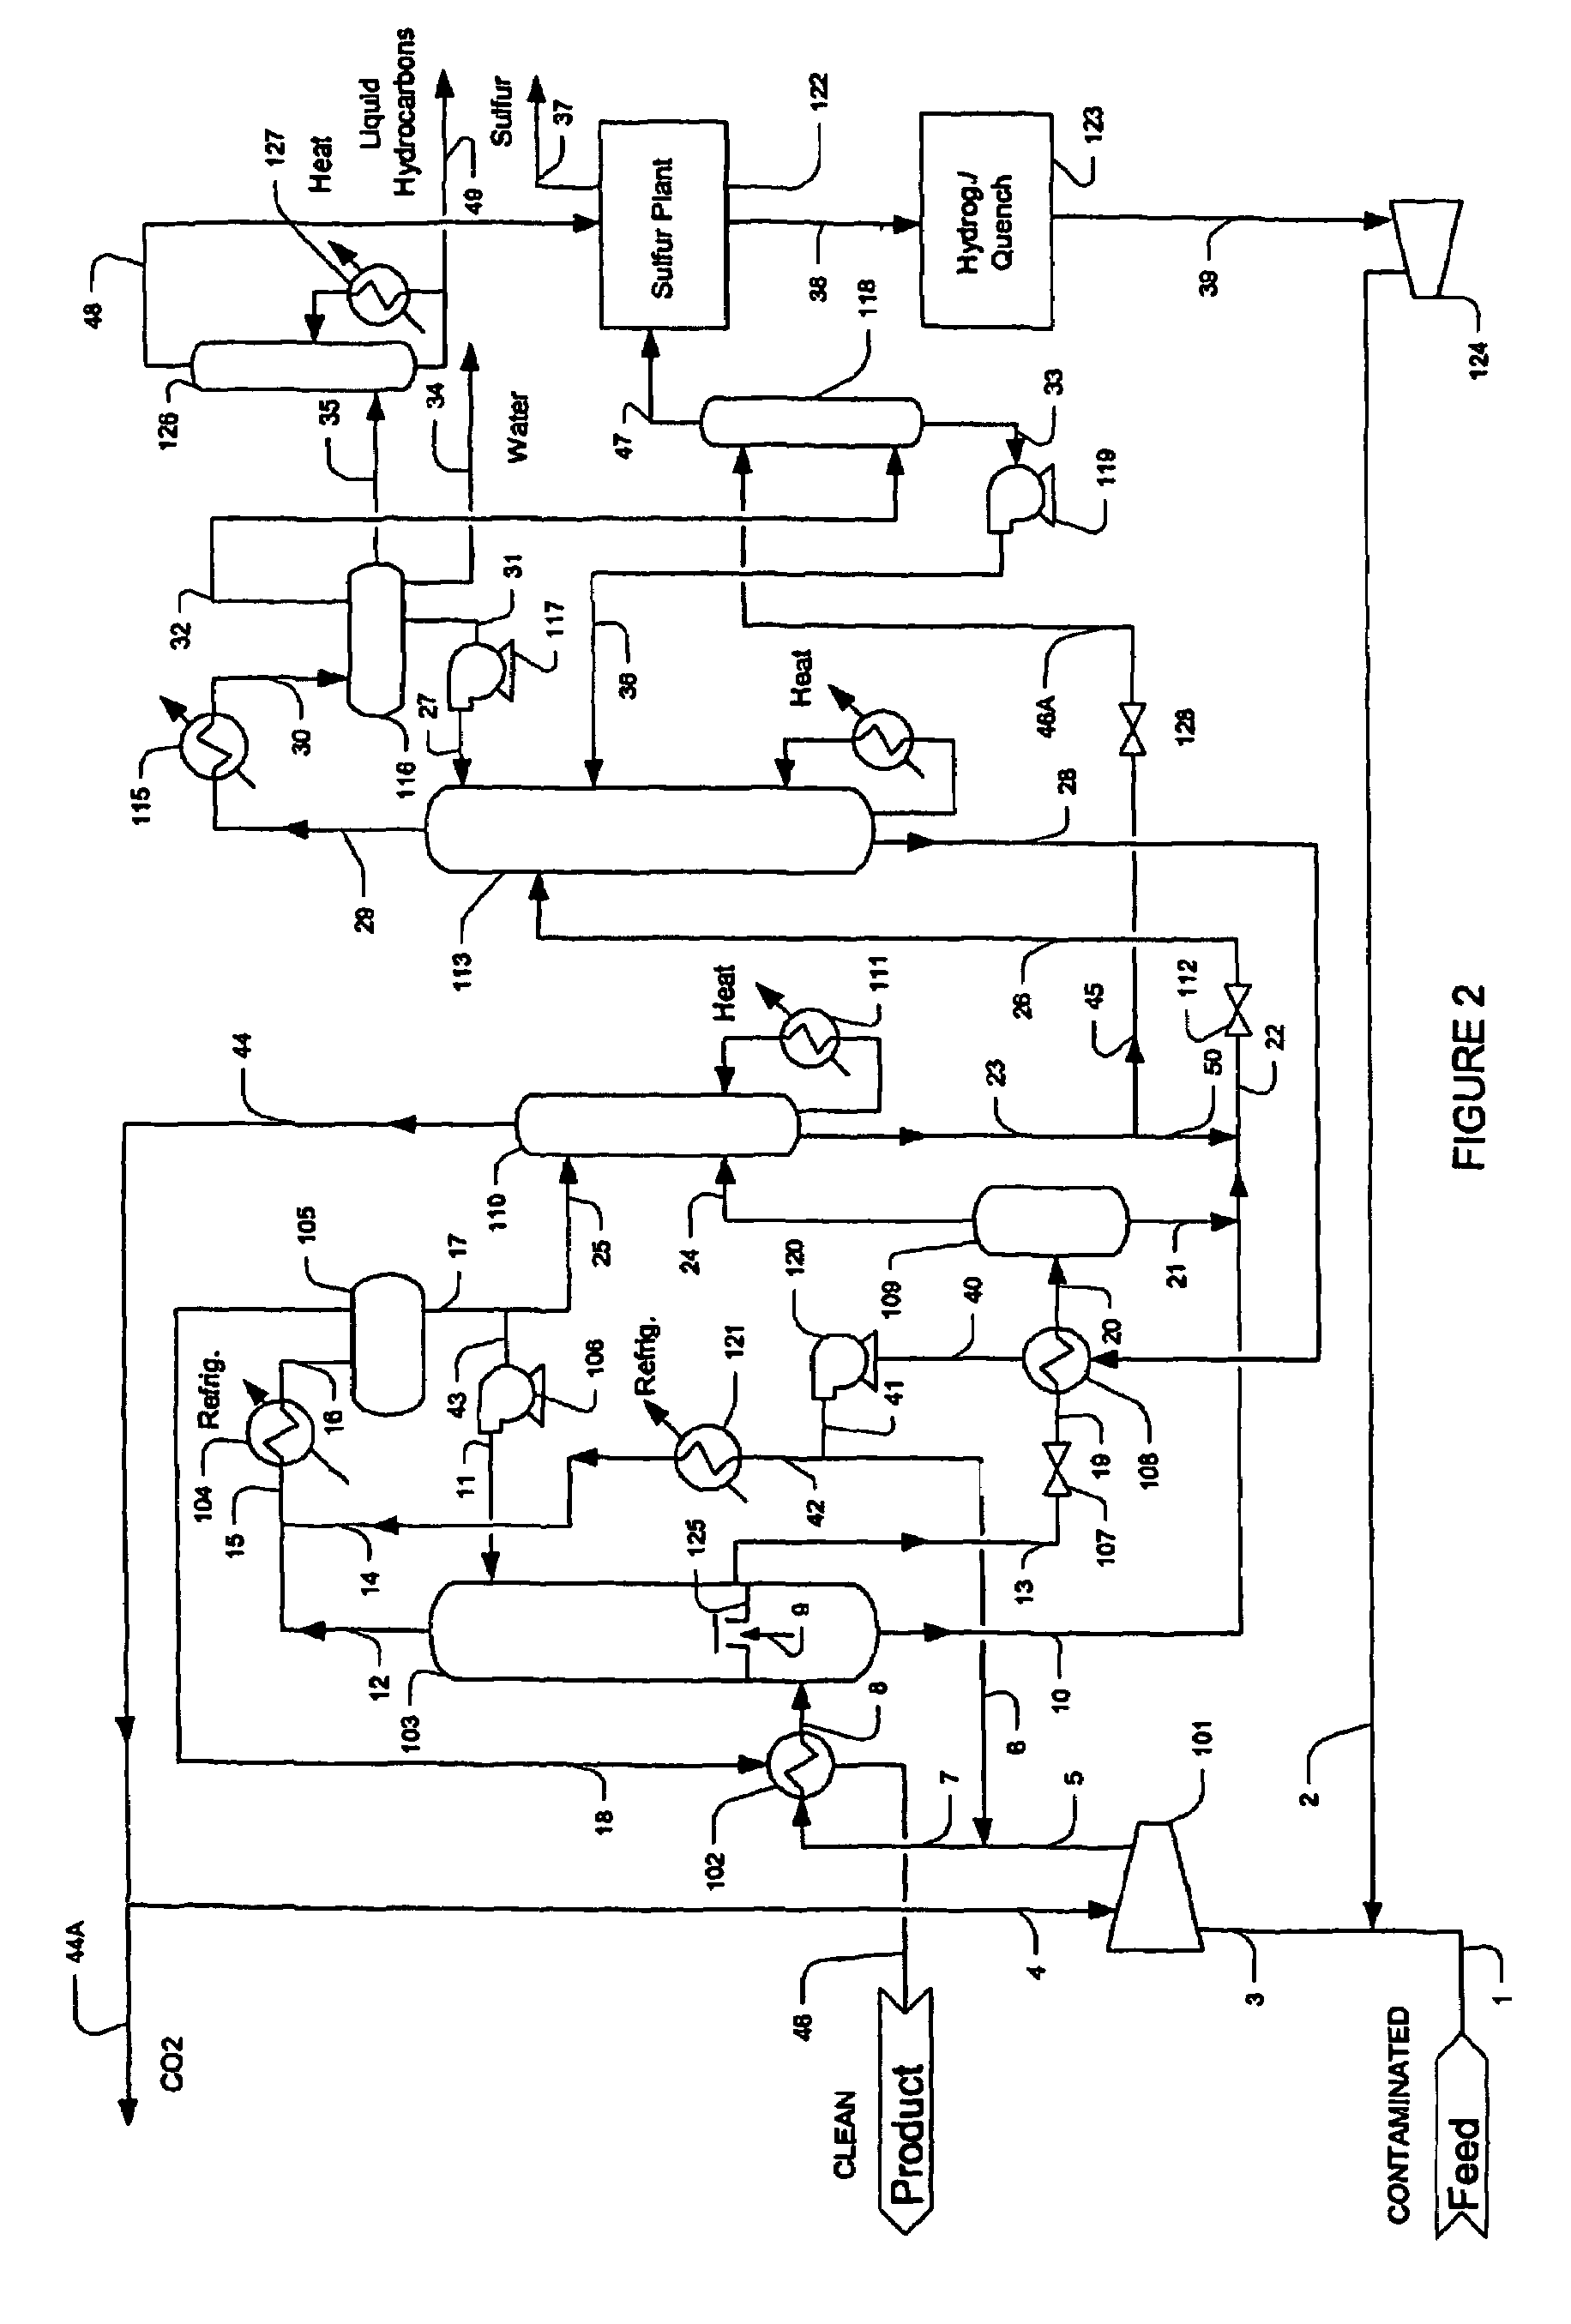 Configurations and methods for acid gas and contaminant removal with near zero emission